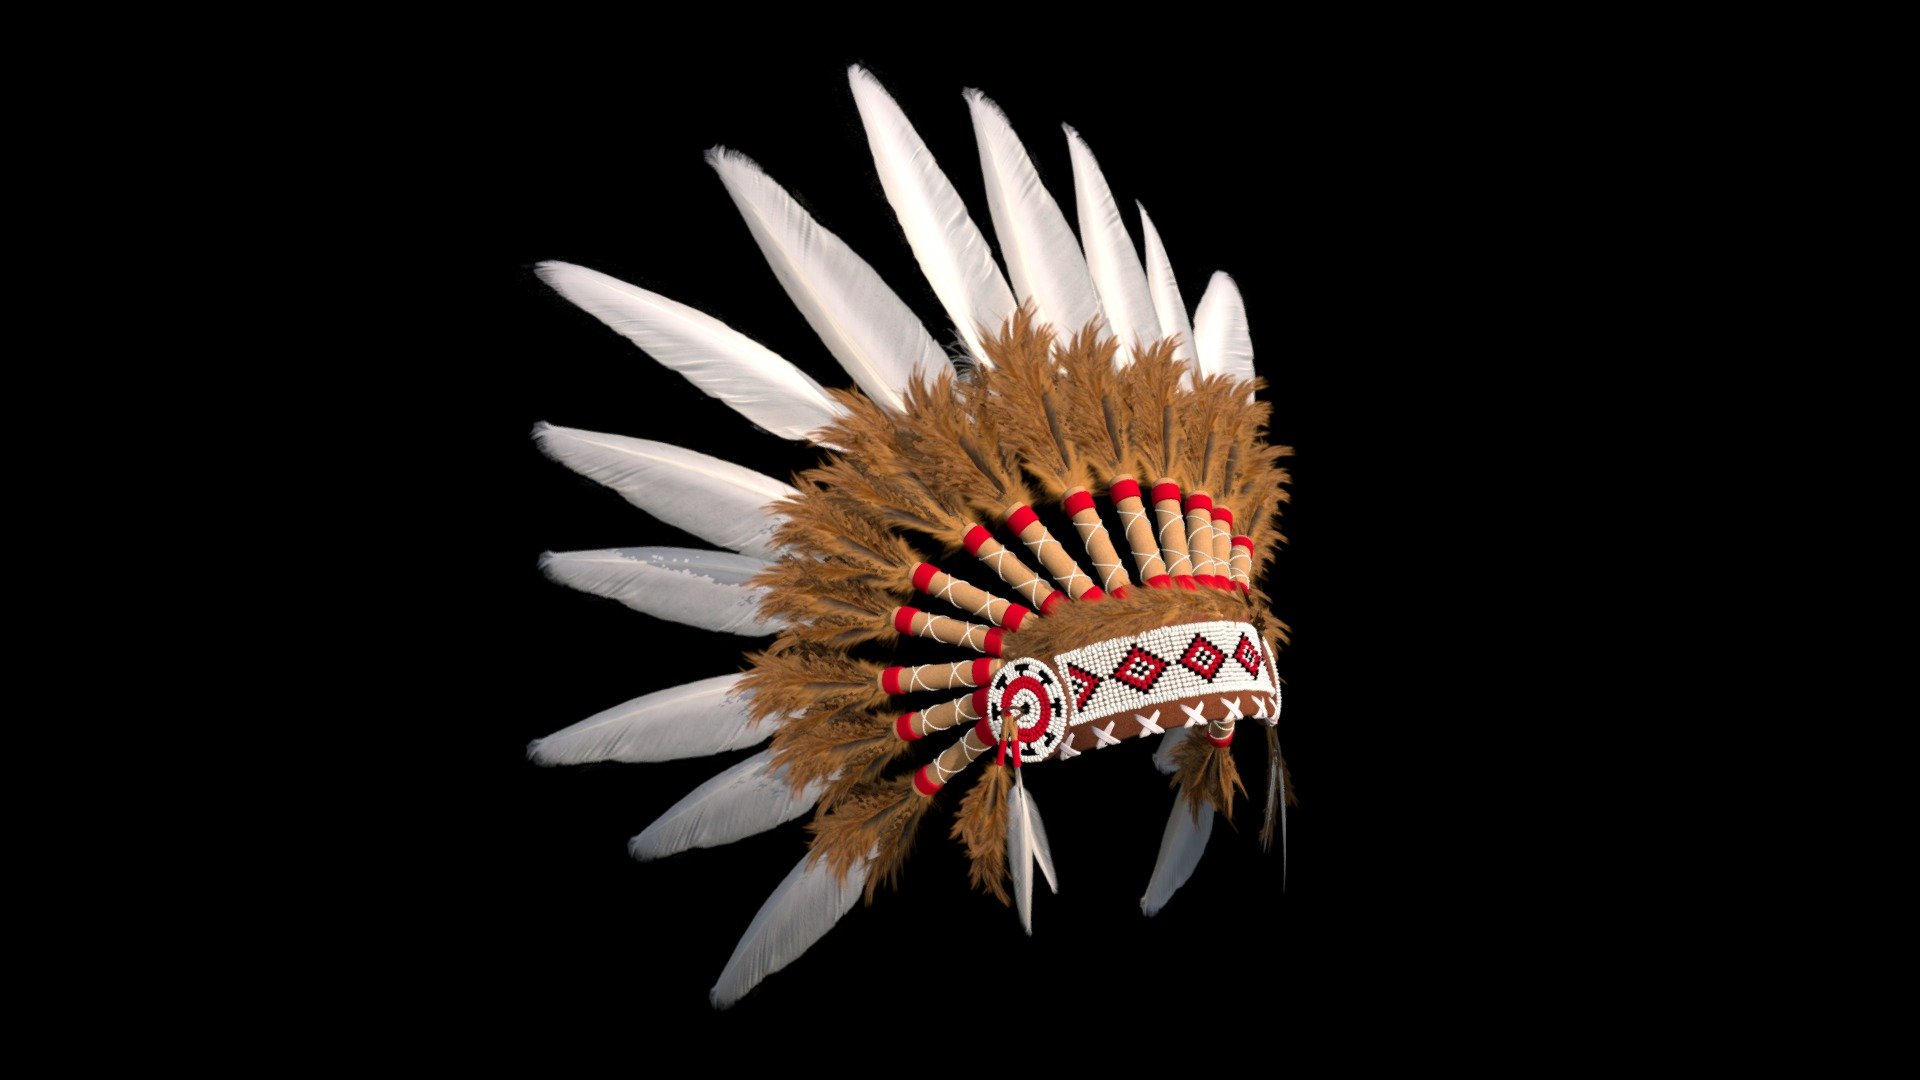 This is the Comanche headdress I modelled over the weekend for one of my characters I'm currently working on. You can check how it looks here:
https://defonten.artstation.com/projects/R3VG6A - Native American Headdress - Buy Royalty Free 3D model by Defonten 3d model